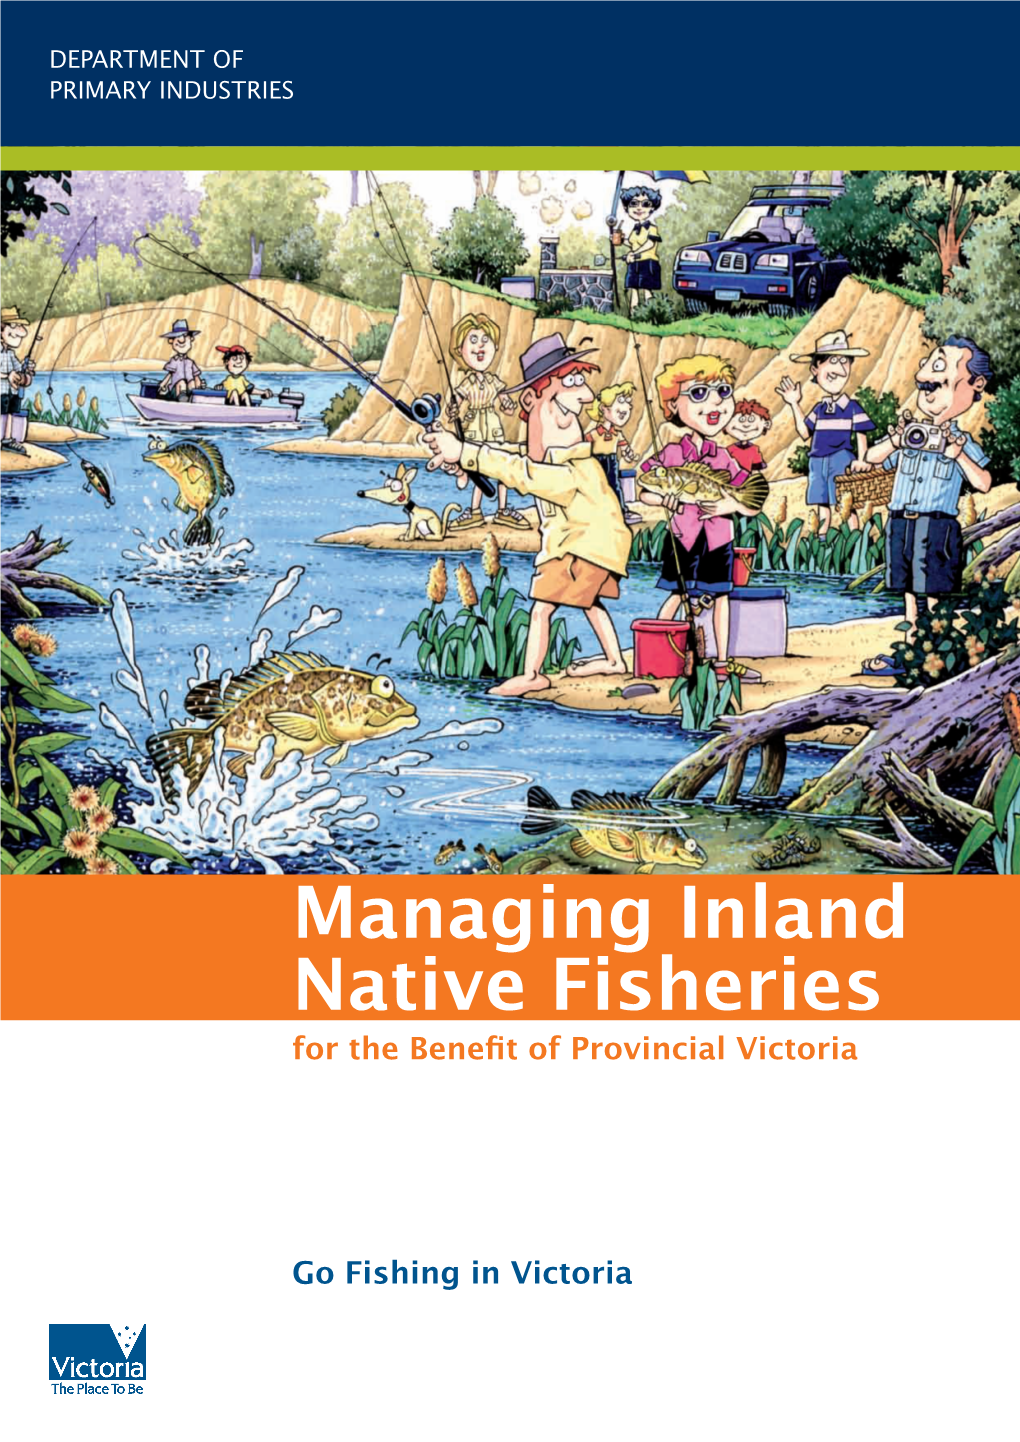 Managing Inland Native Fisheries for the Benefit of Provincial Victoria